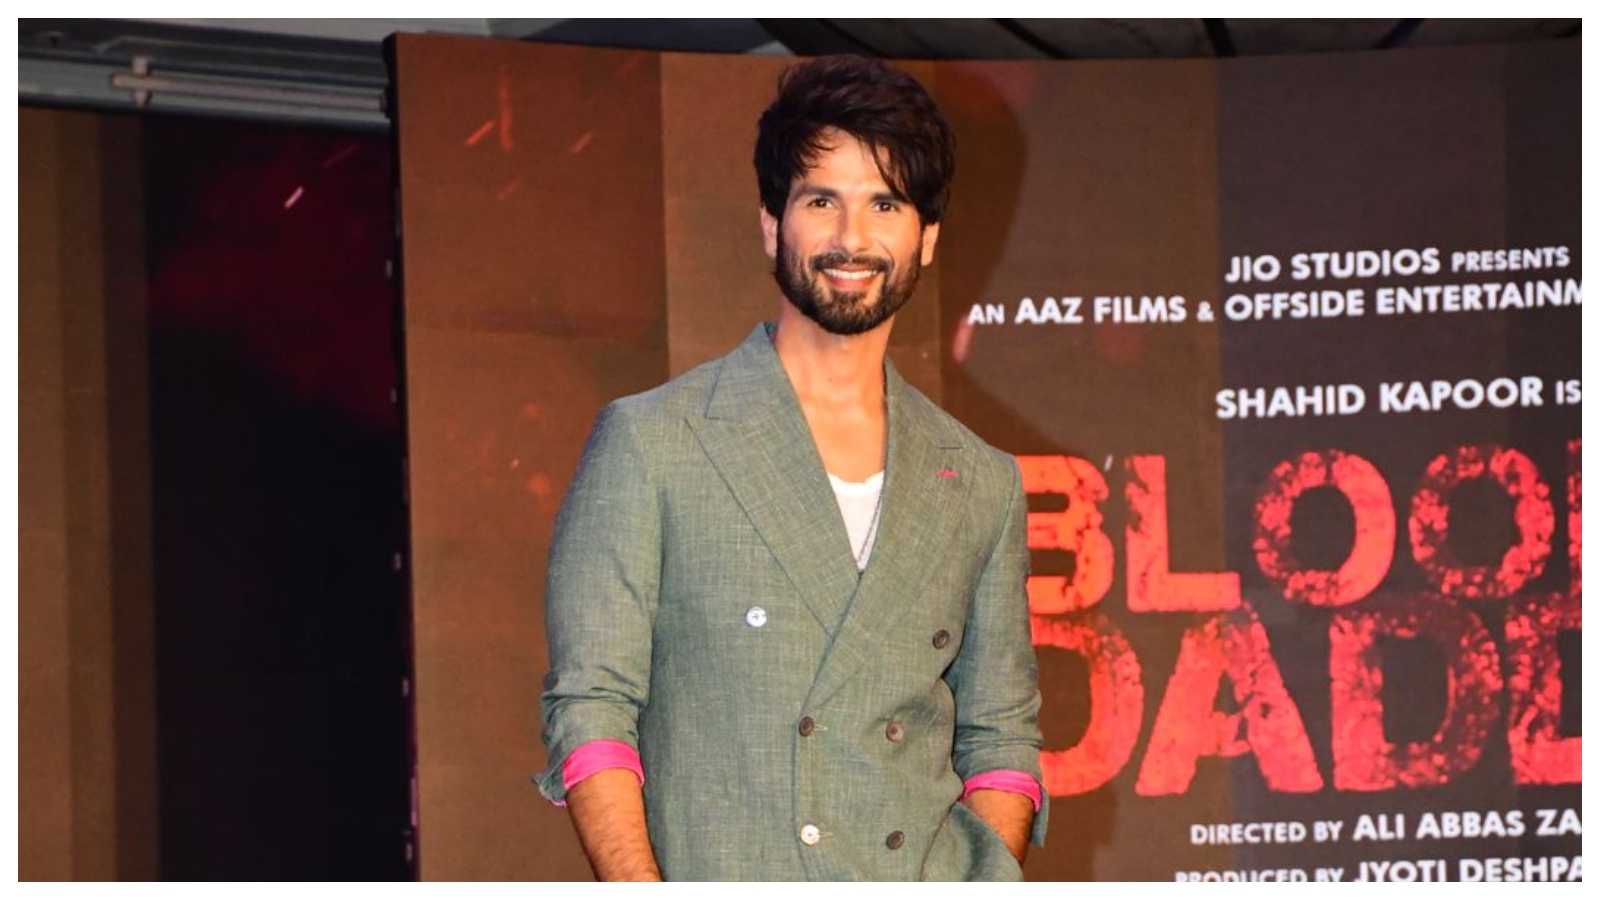 Bloody Daddy star Shahid Kapoor believes Hindi films are getting better, says 'Hollywood cannot give Hindi film vibes'